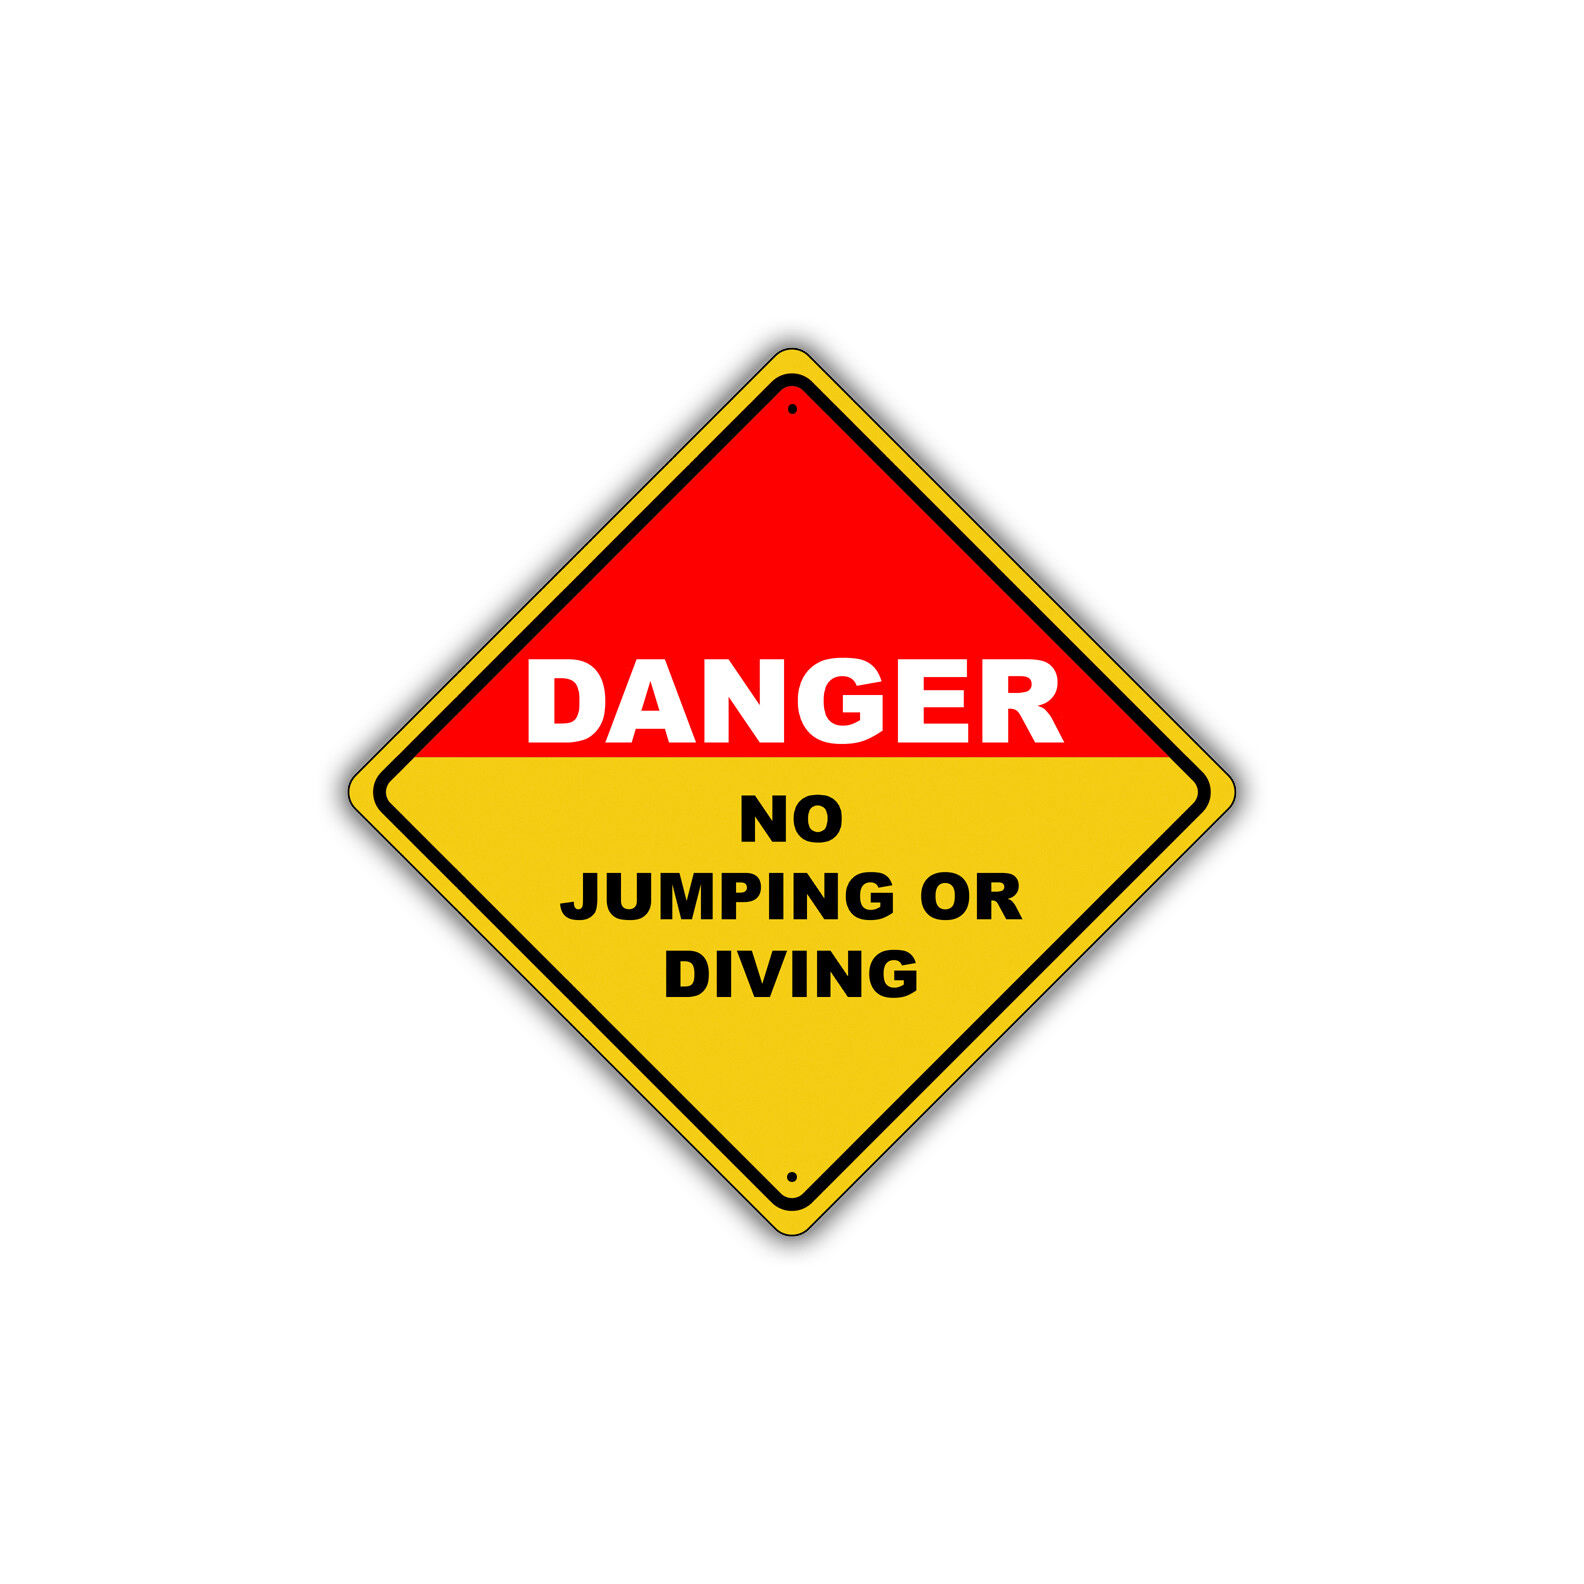 Danger No Jumping or Diving Shallow Water Pool Aluminum Metal Safety Sign 12x12